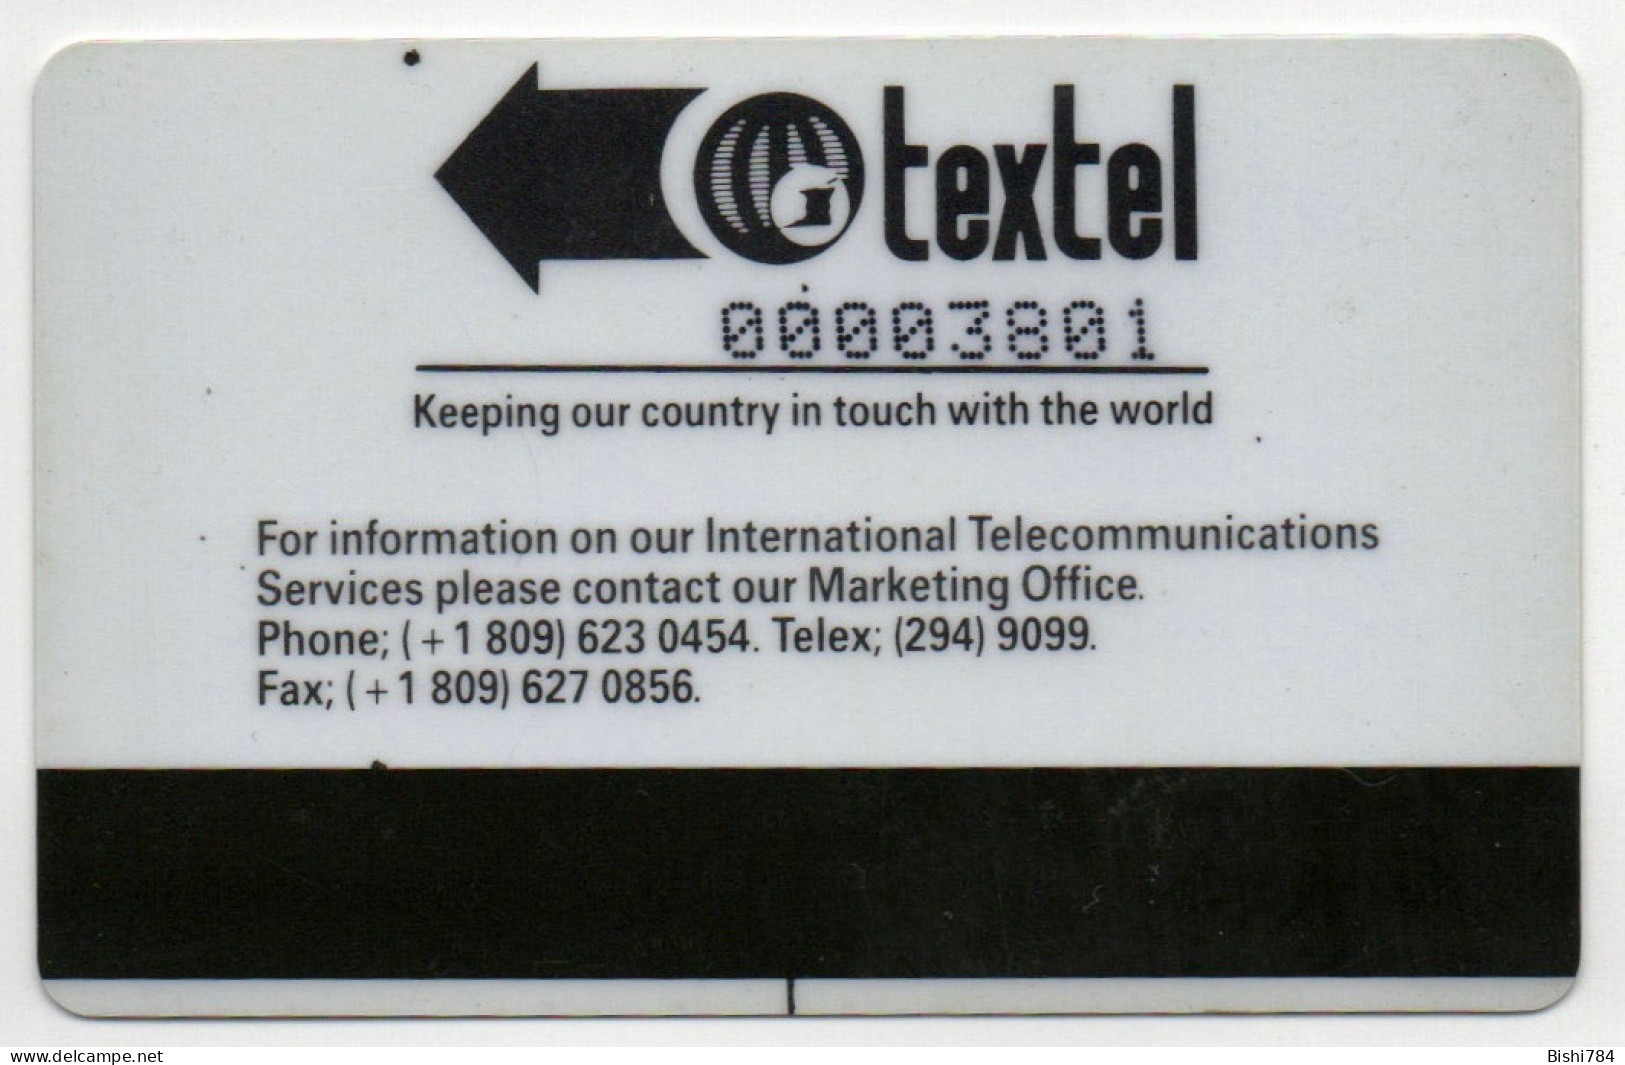 Trinidad & Tobago - Mathura Earth Station 2 (Control Number Below "Textel". With Small "I" Below The Magnetic Band) - Trinité & Tobago